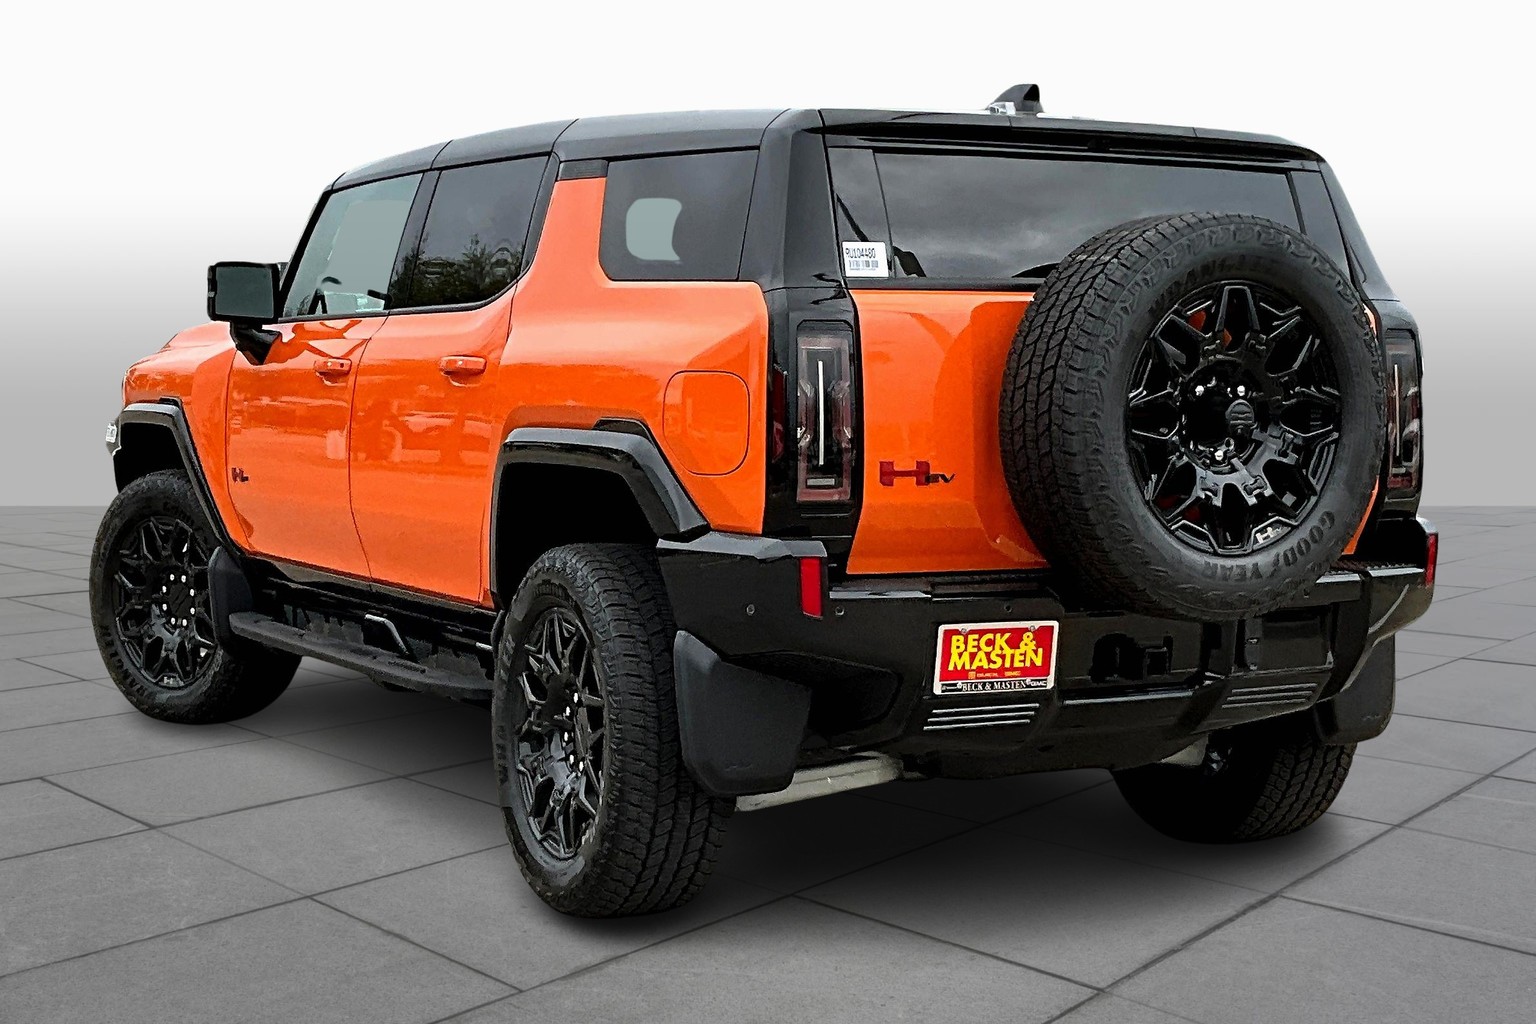 Meet The Hummer H1 X3: A Hummer 3 Times The Size With 3 More Engines